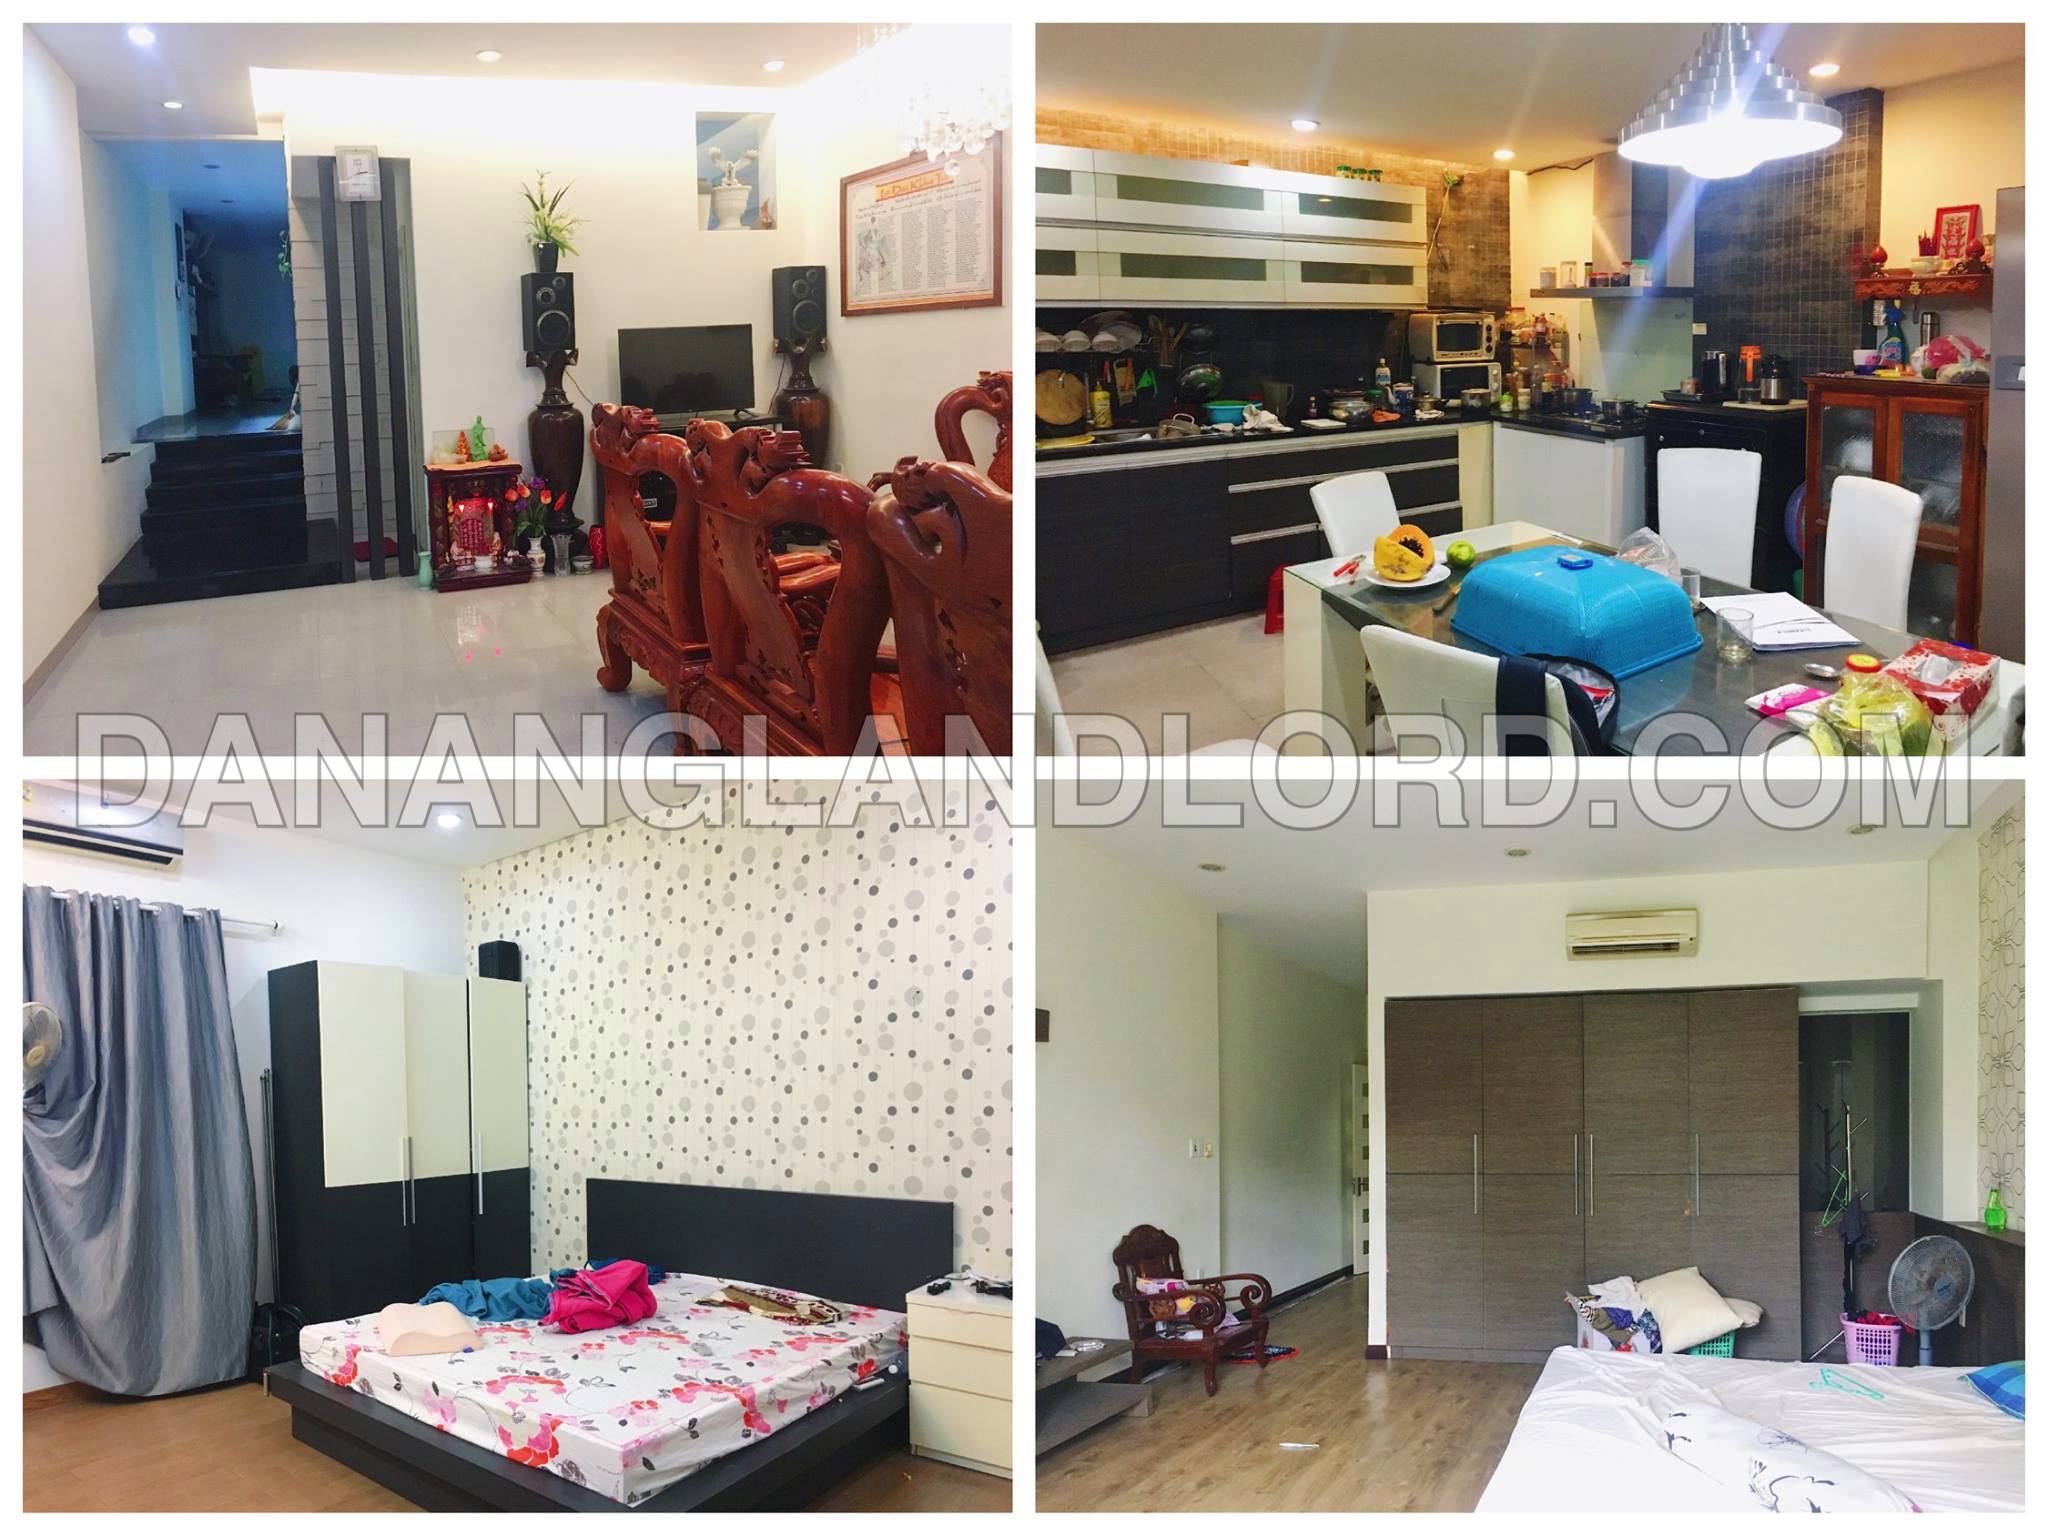 The 3 floor house with 5 bedrooms close to Pham Van Dong street